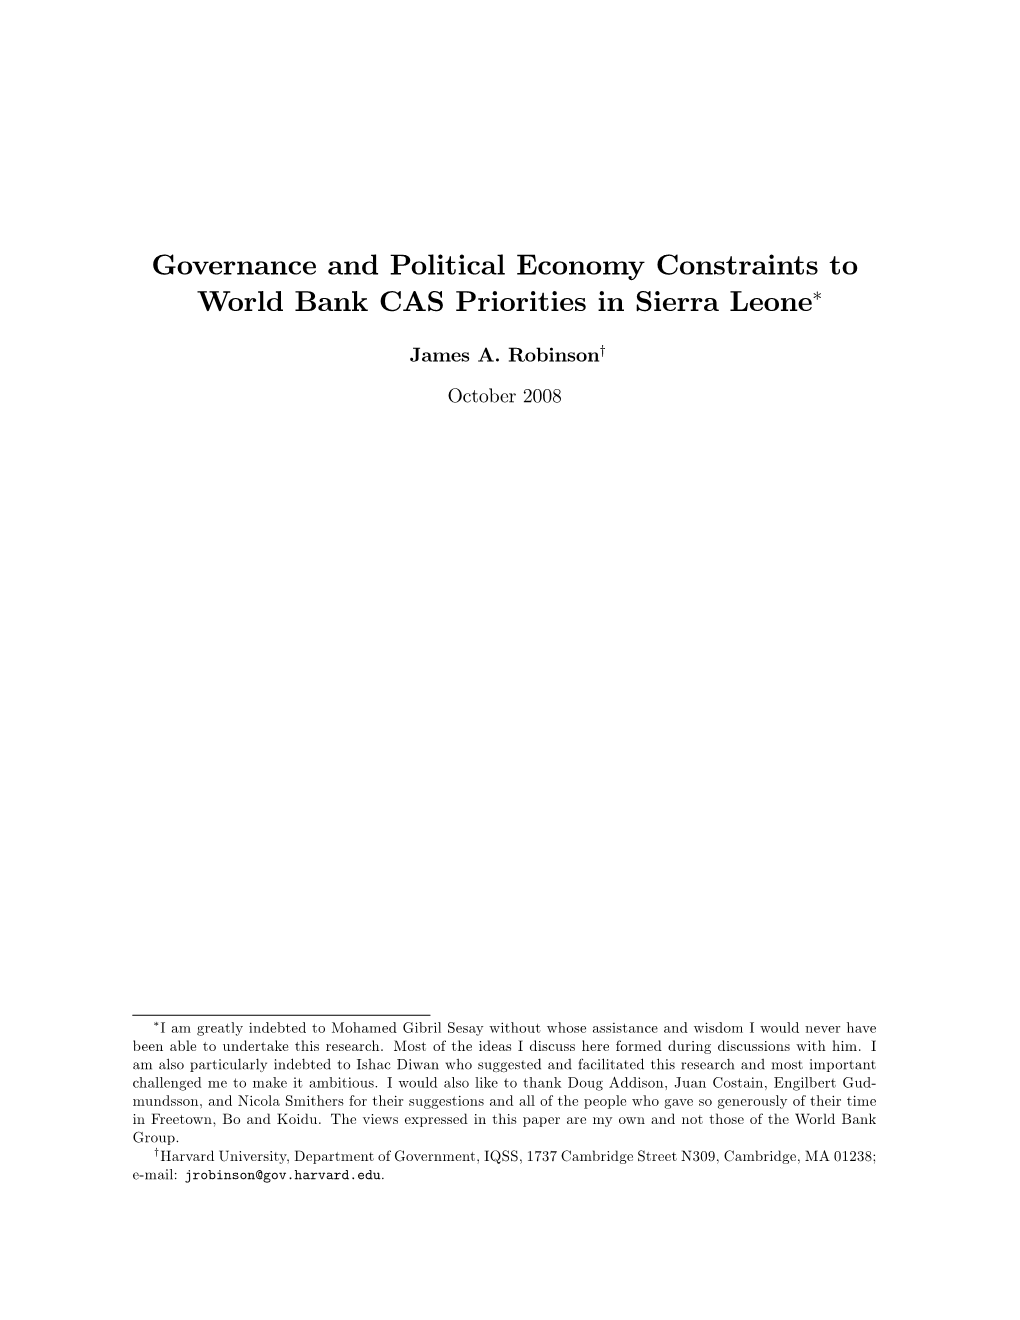 Governance and Political Economy Constraints to World Bank CAS Priorities in Sierra Leone